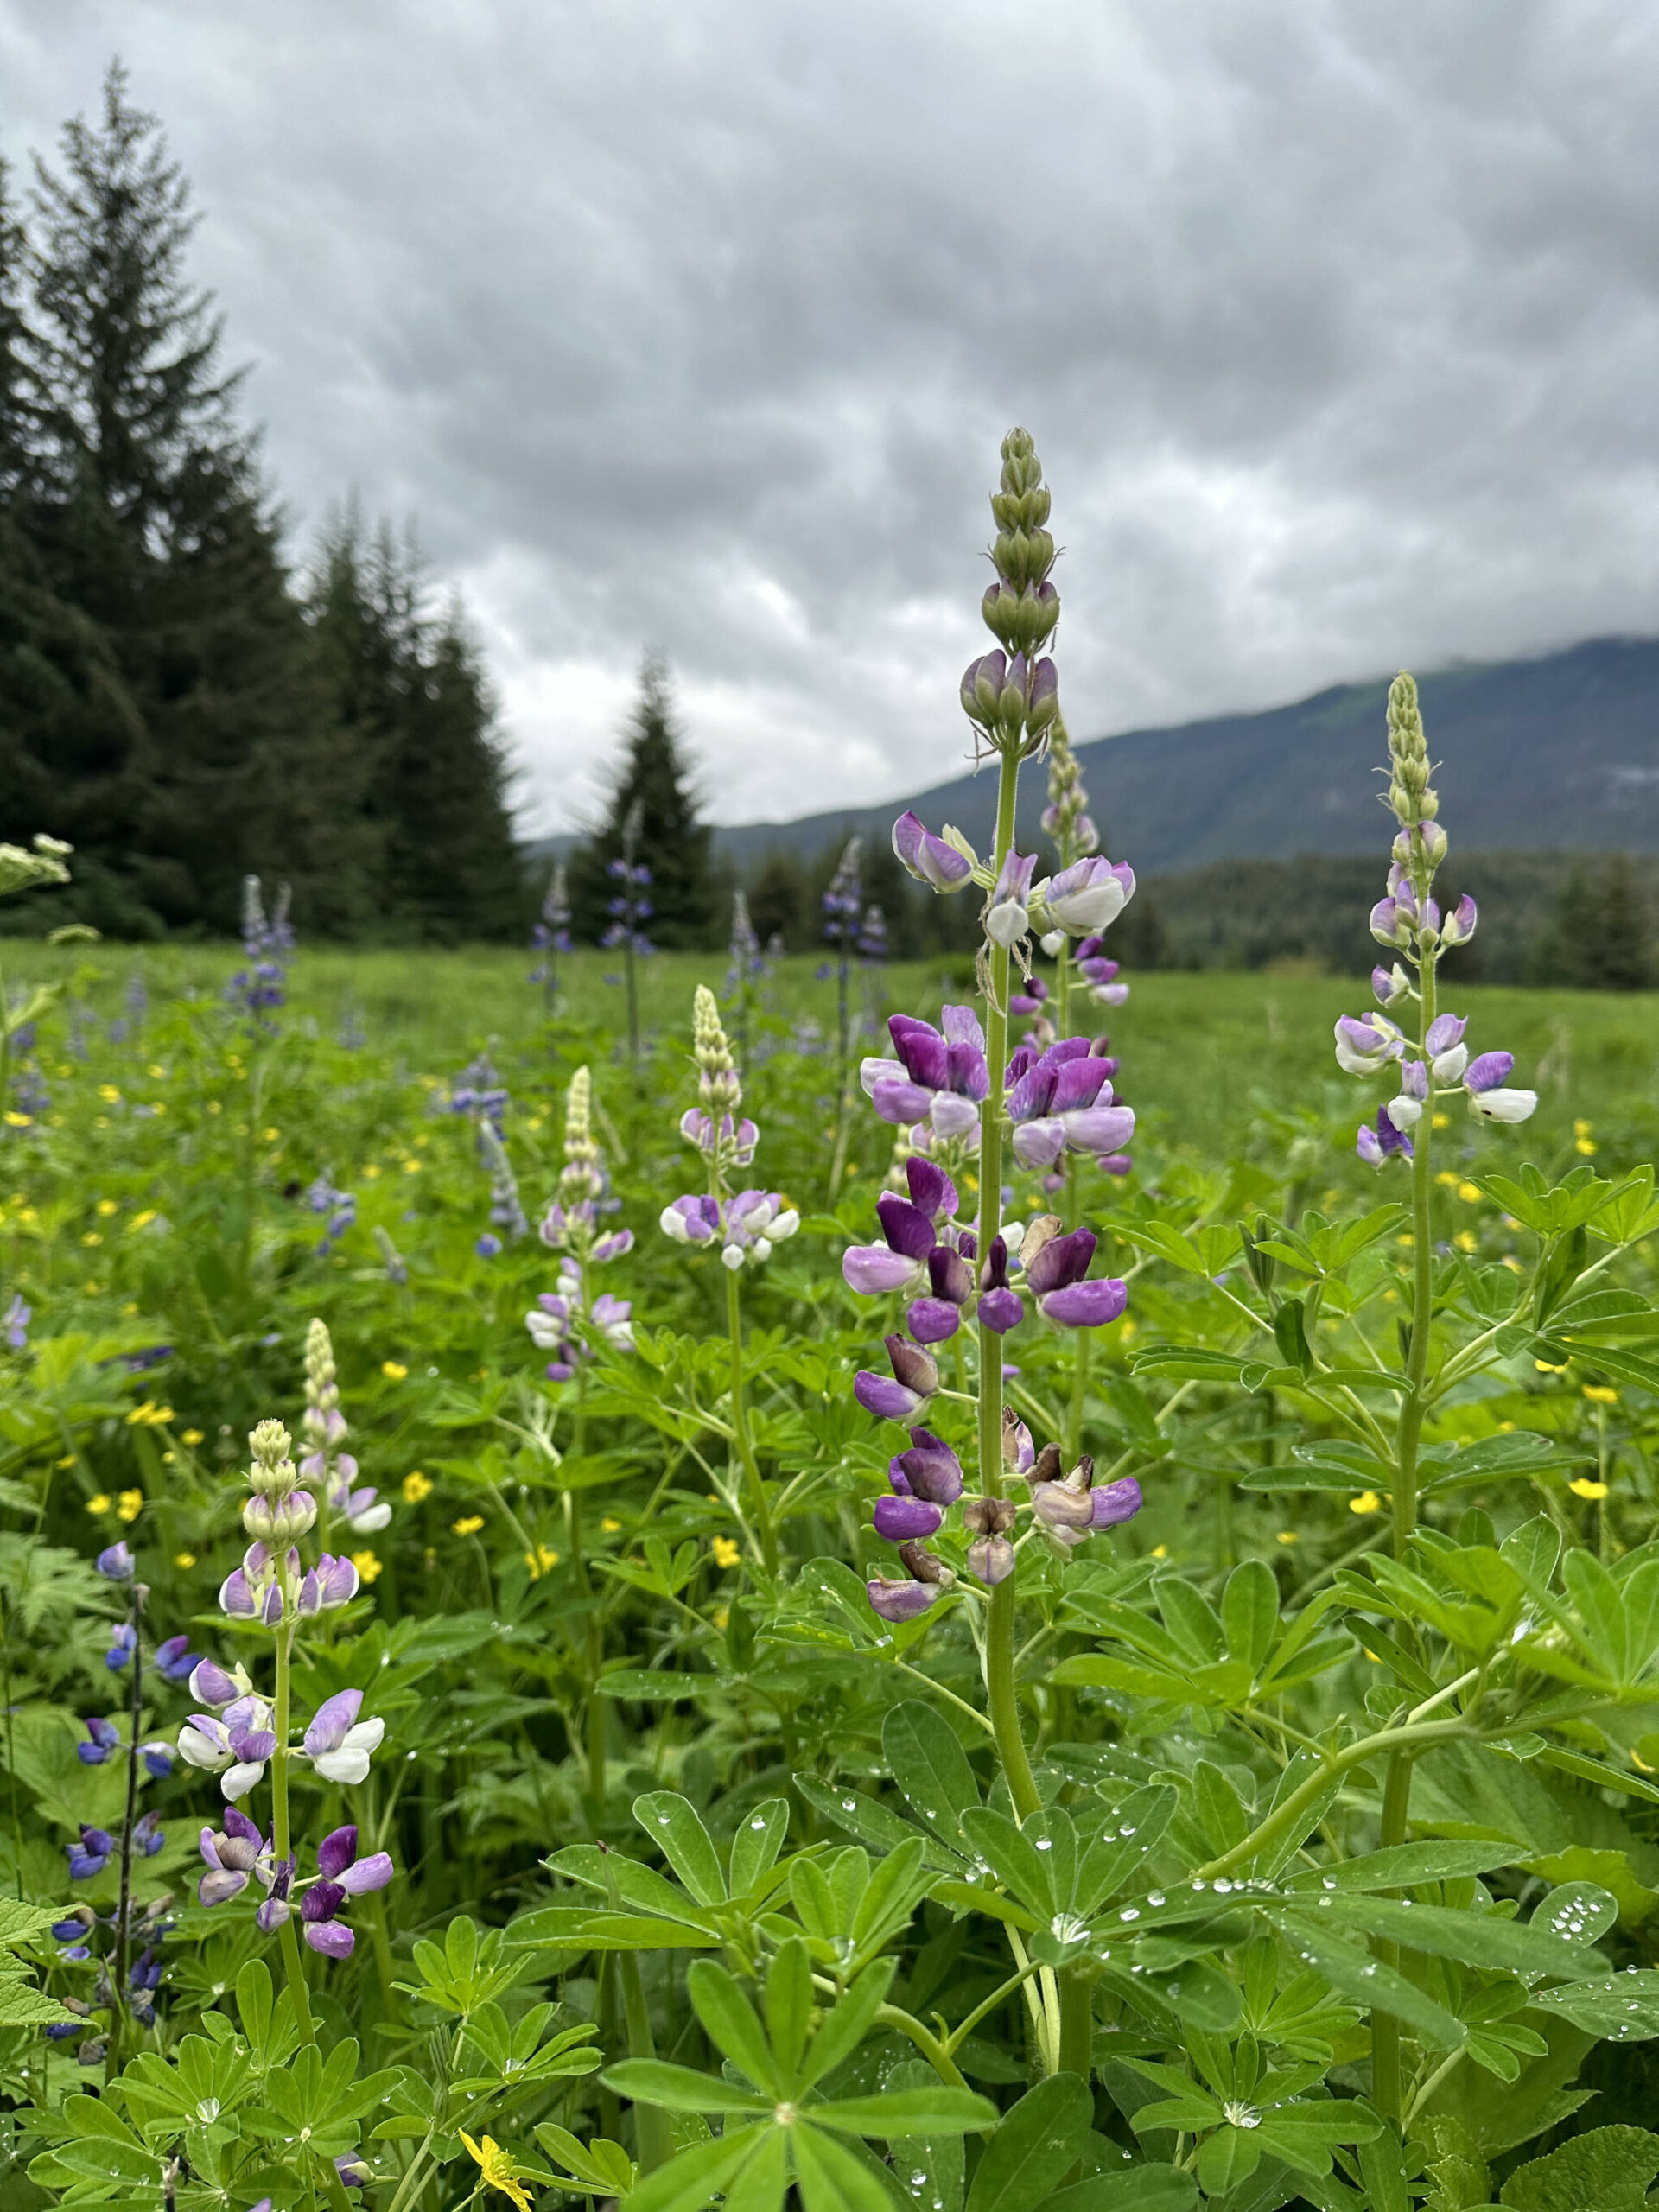 Pinkish lupine on the Point Bridget Trail on June 24. (Photo by Deana Barajas)